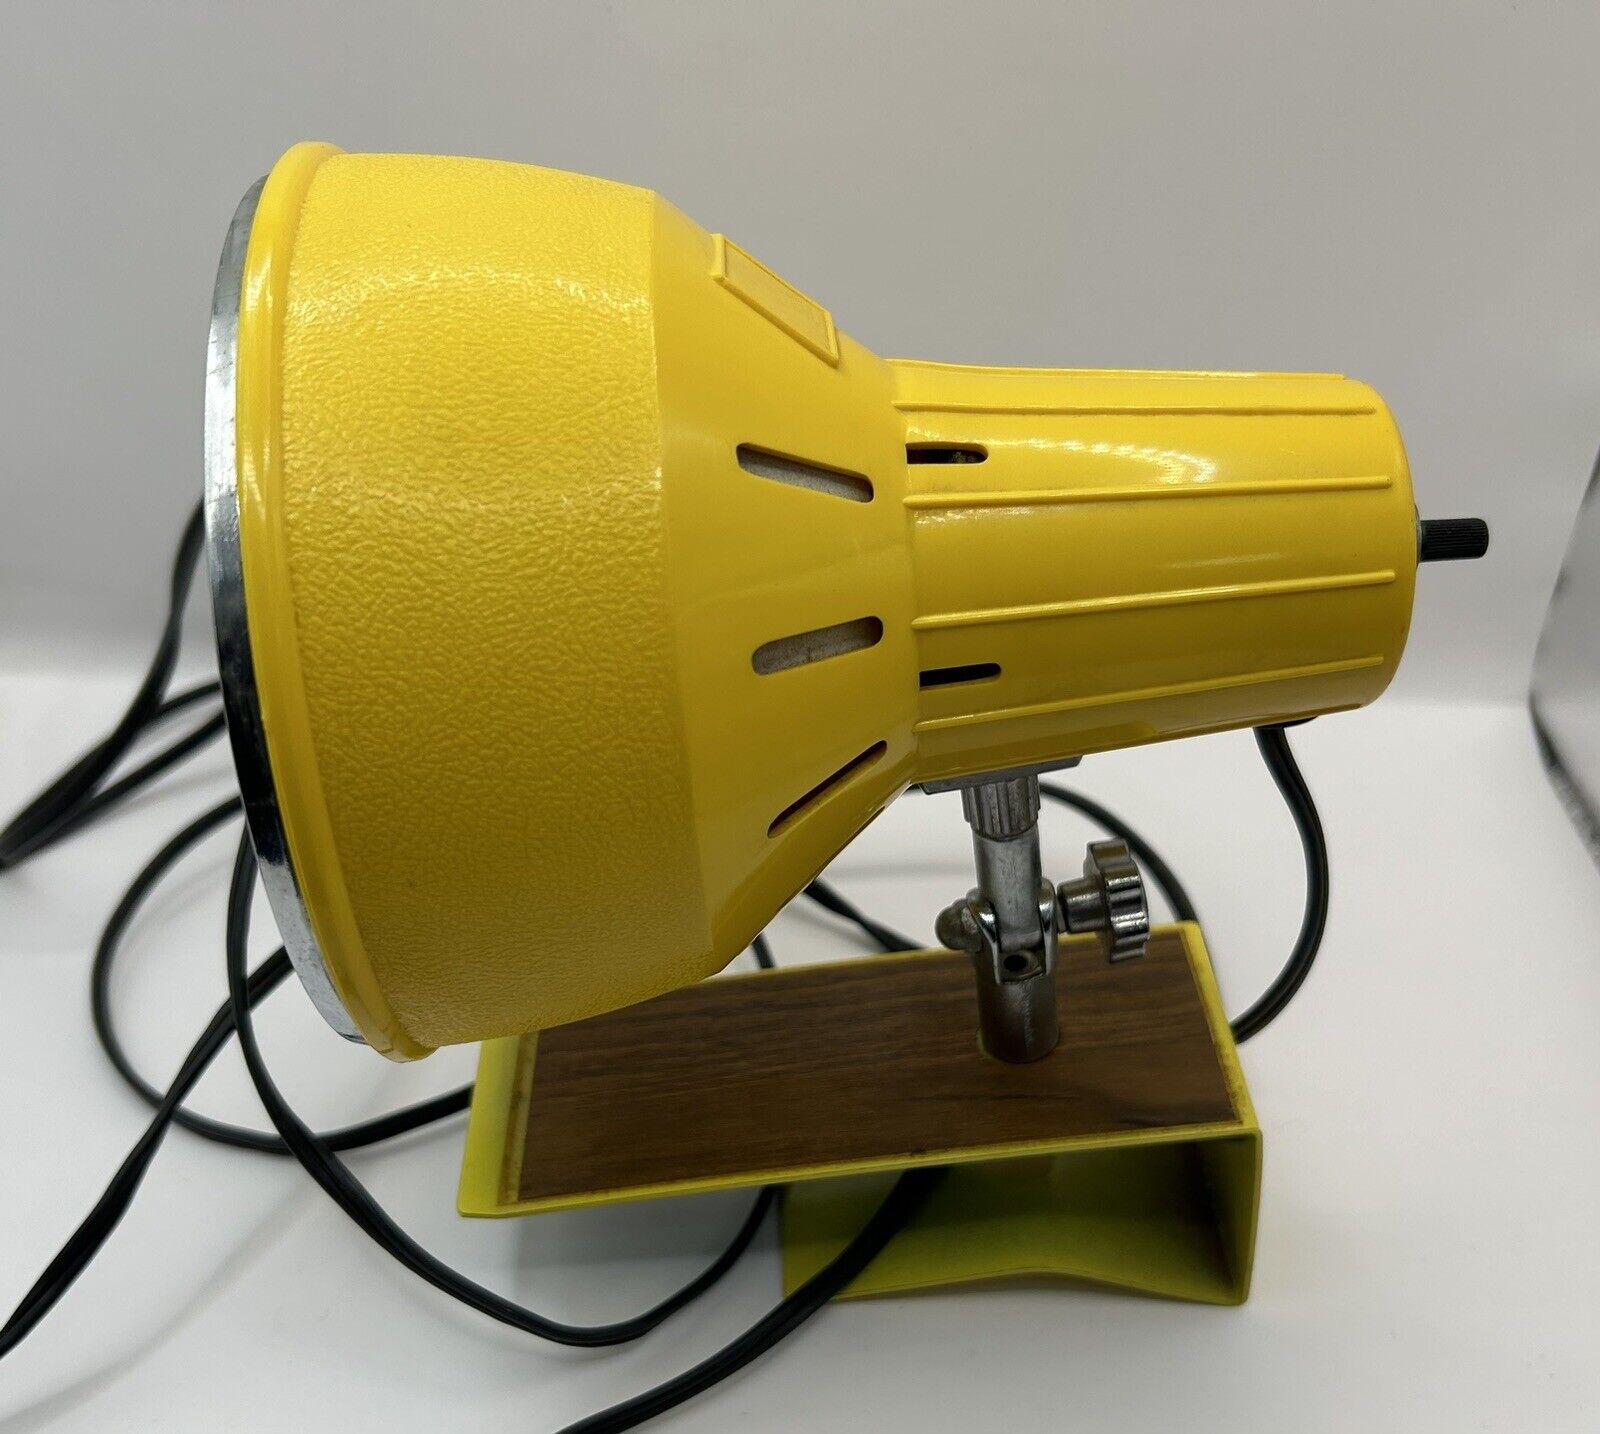 Underwriters Laboratory,  A-5494, 60w Portable Lamp, Yellow, Vintage